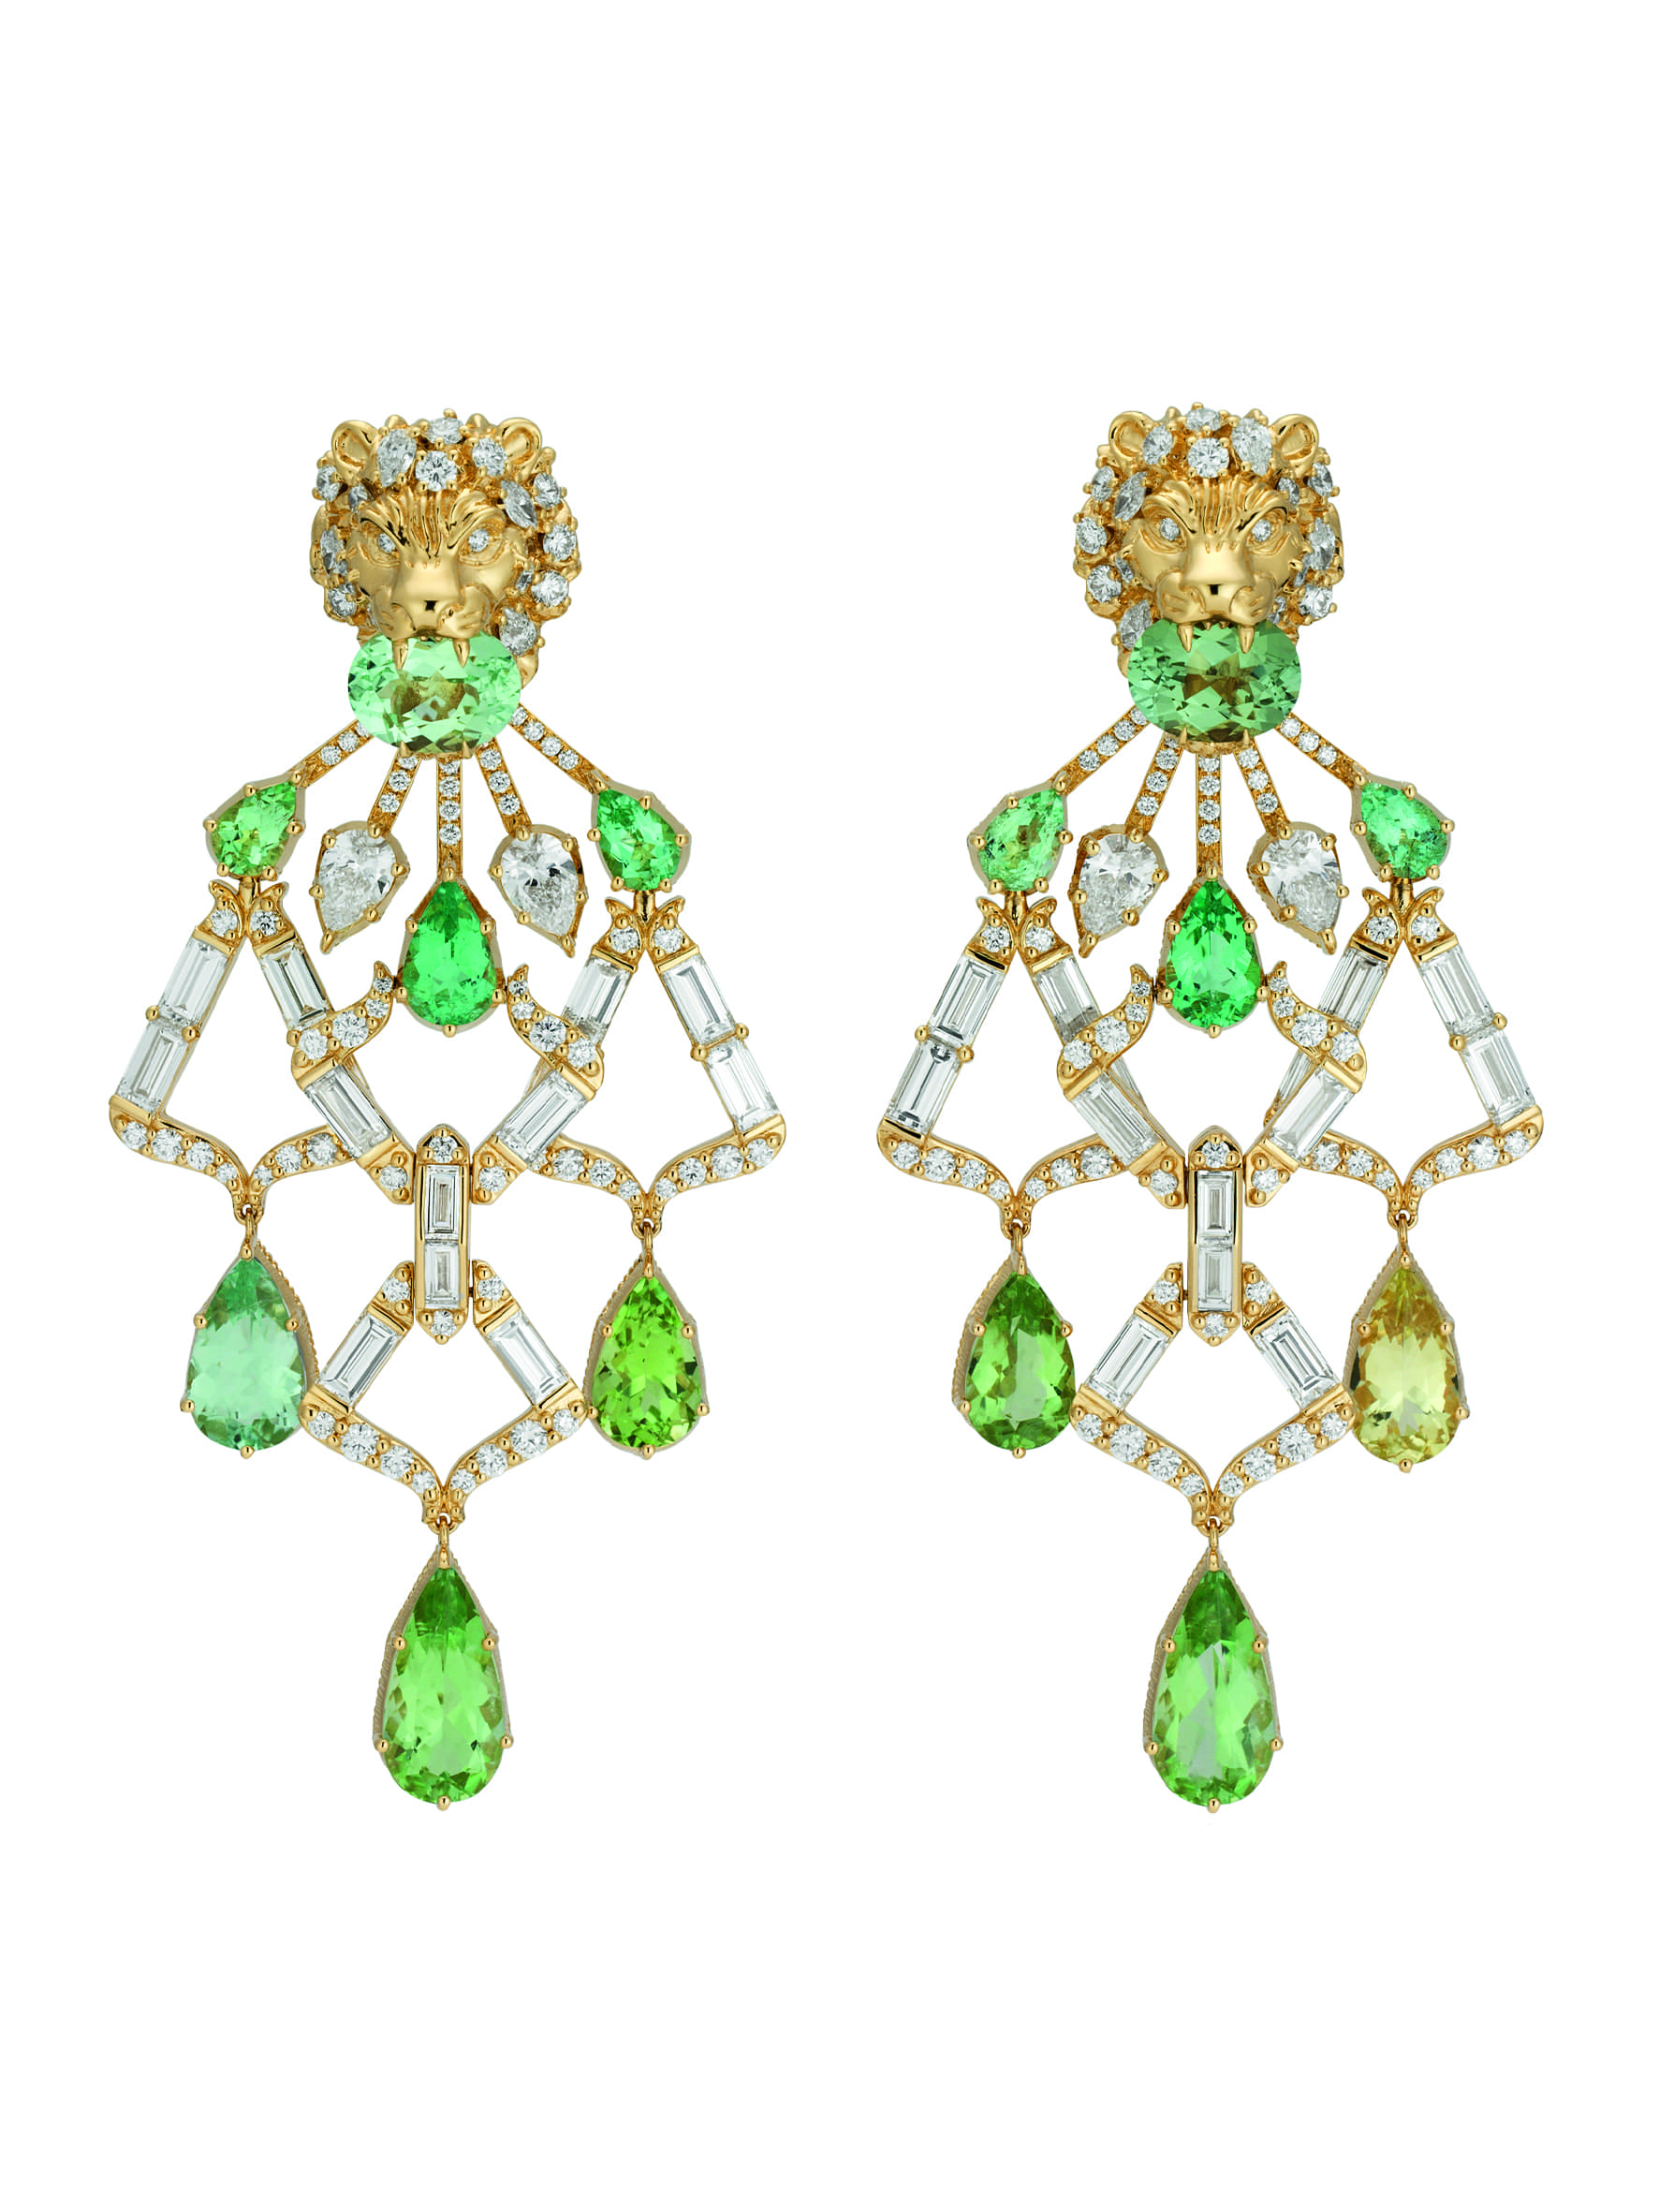 Introducing Gucci Allegori a The House’s Latest High Jewelry Collection ...